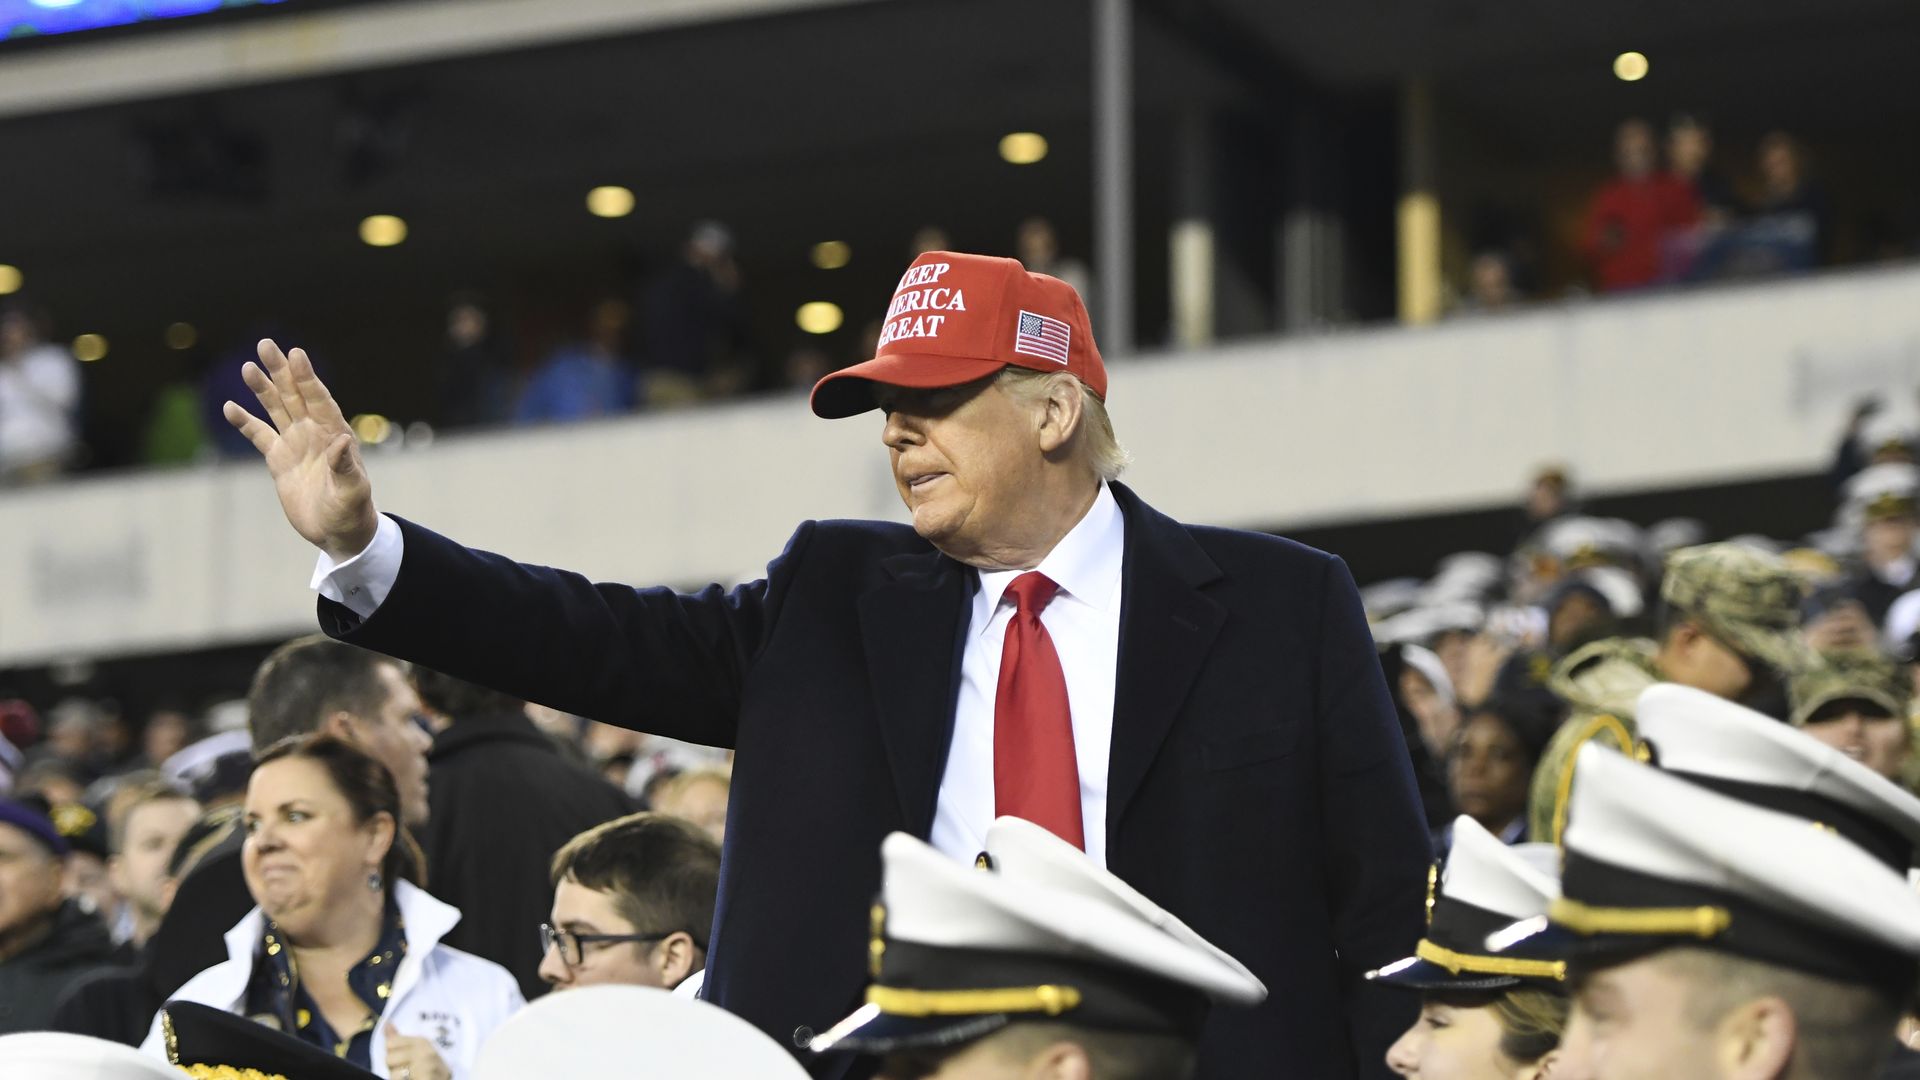 In this image, Trump stands in a MAGA hat amid people wearing Navy hats and uniforms